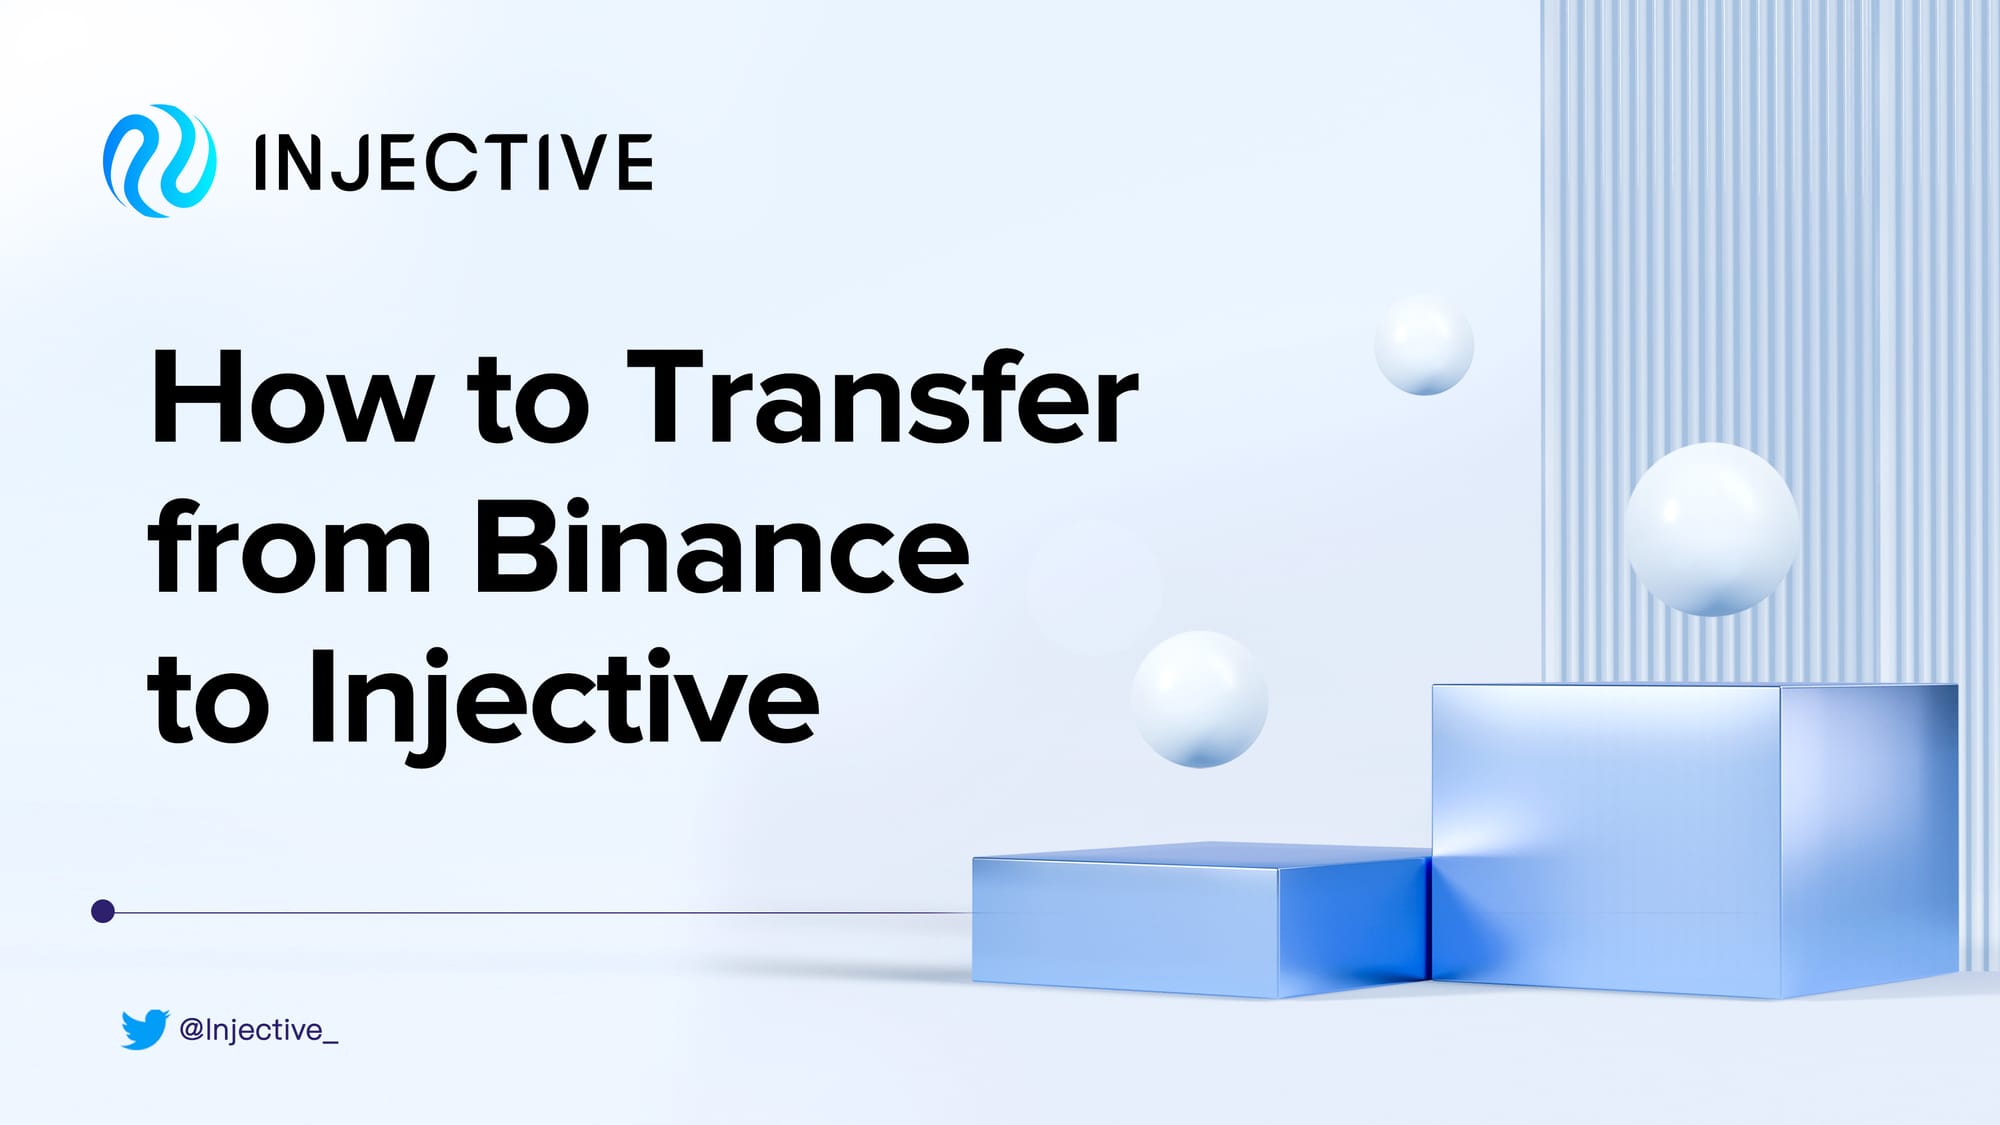 How To Transfer From Binance to Injective